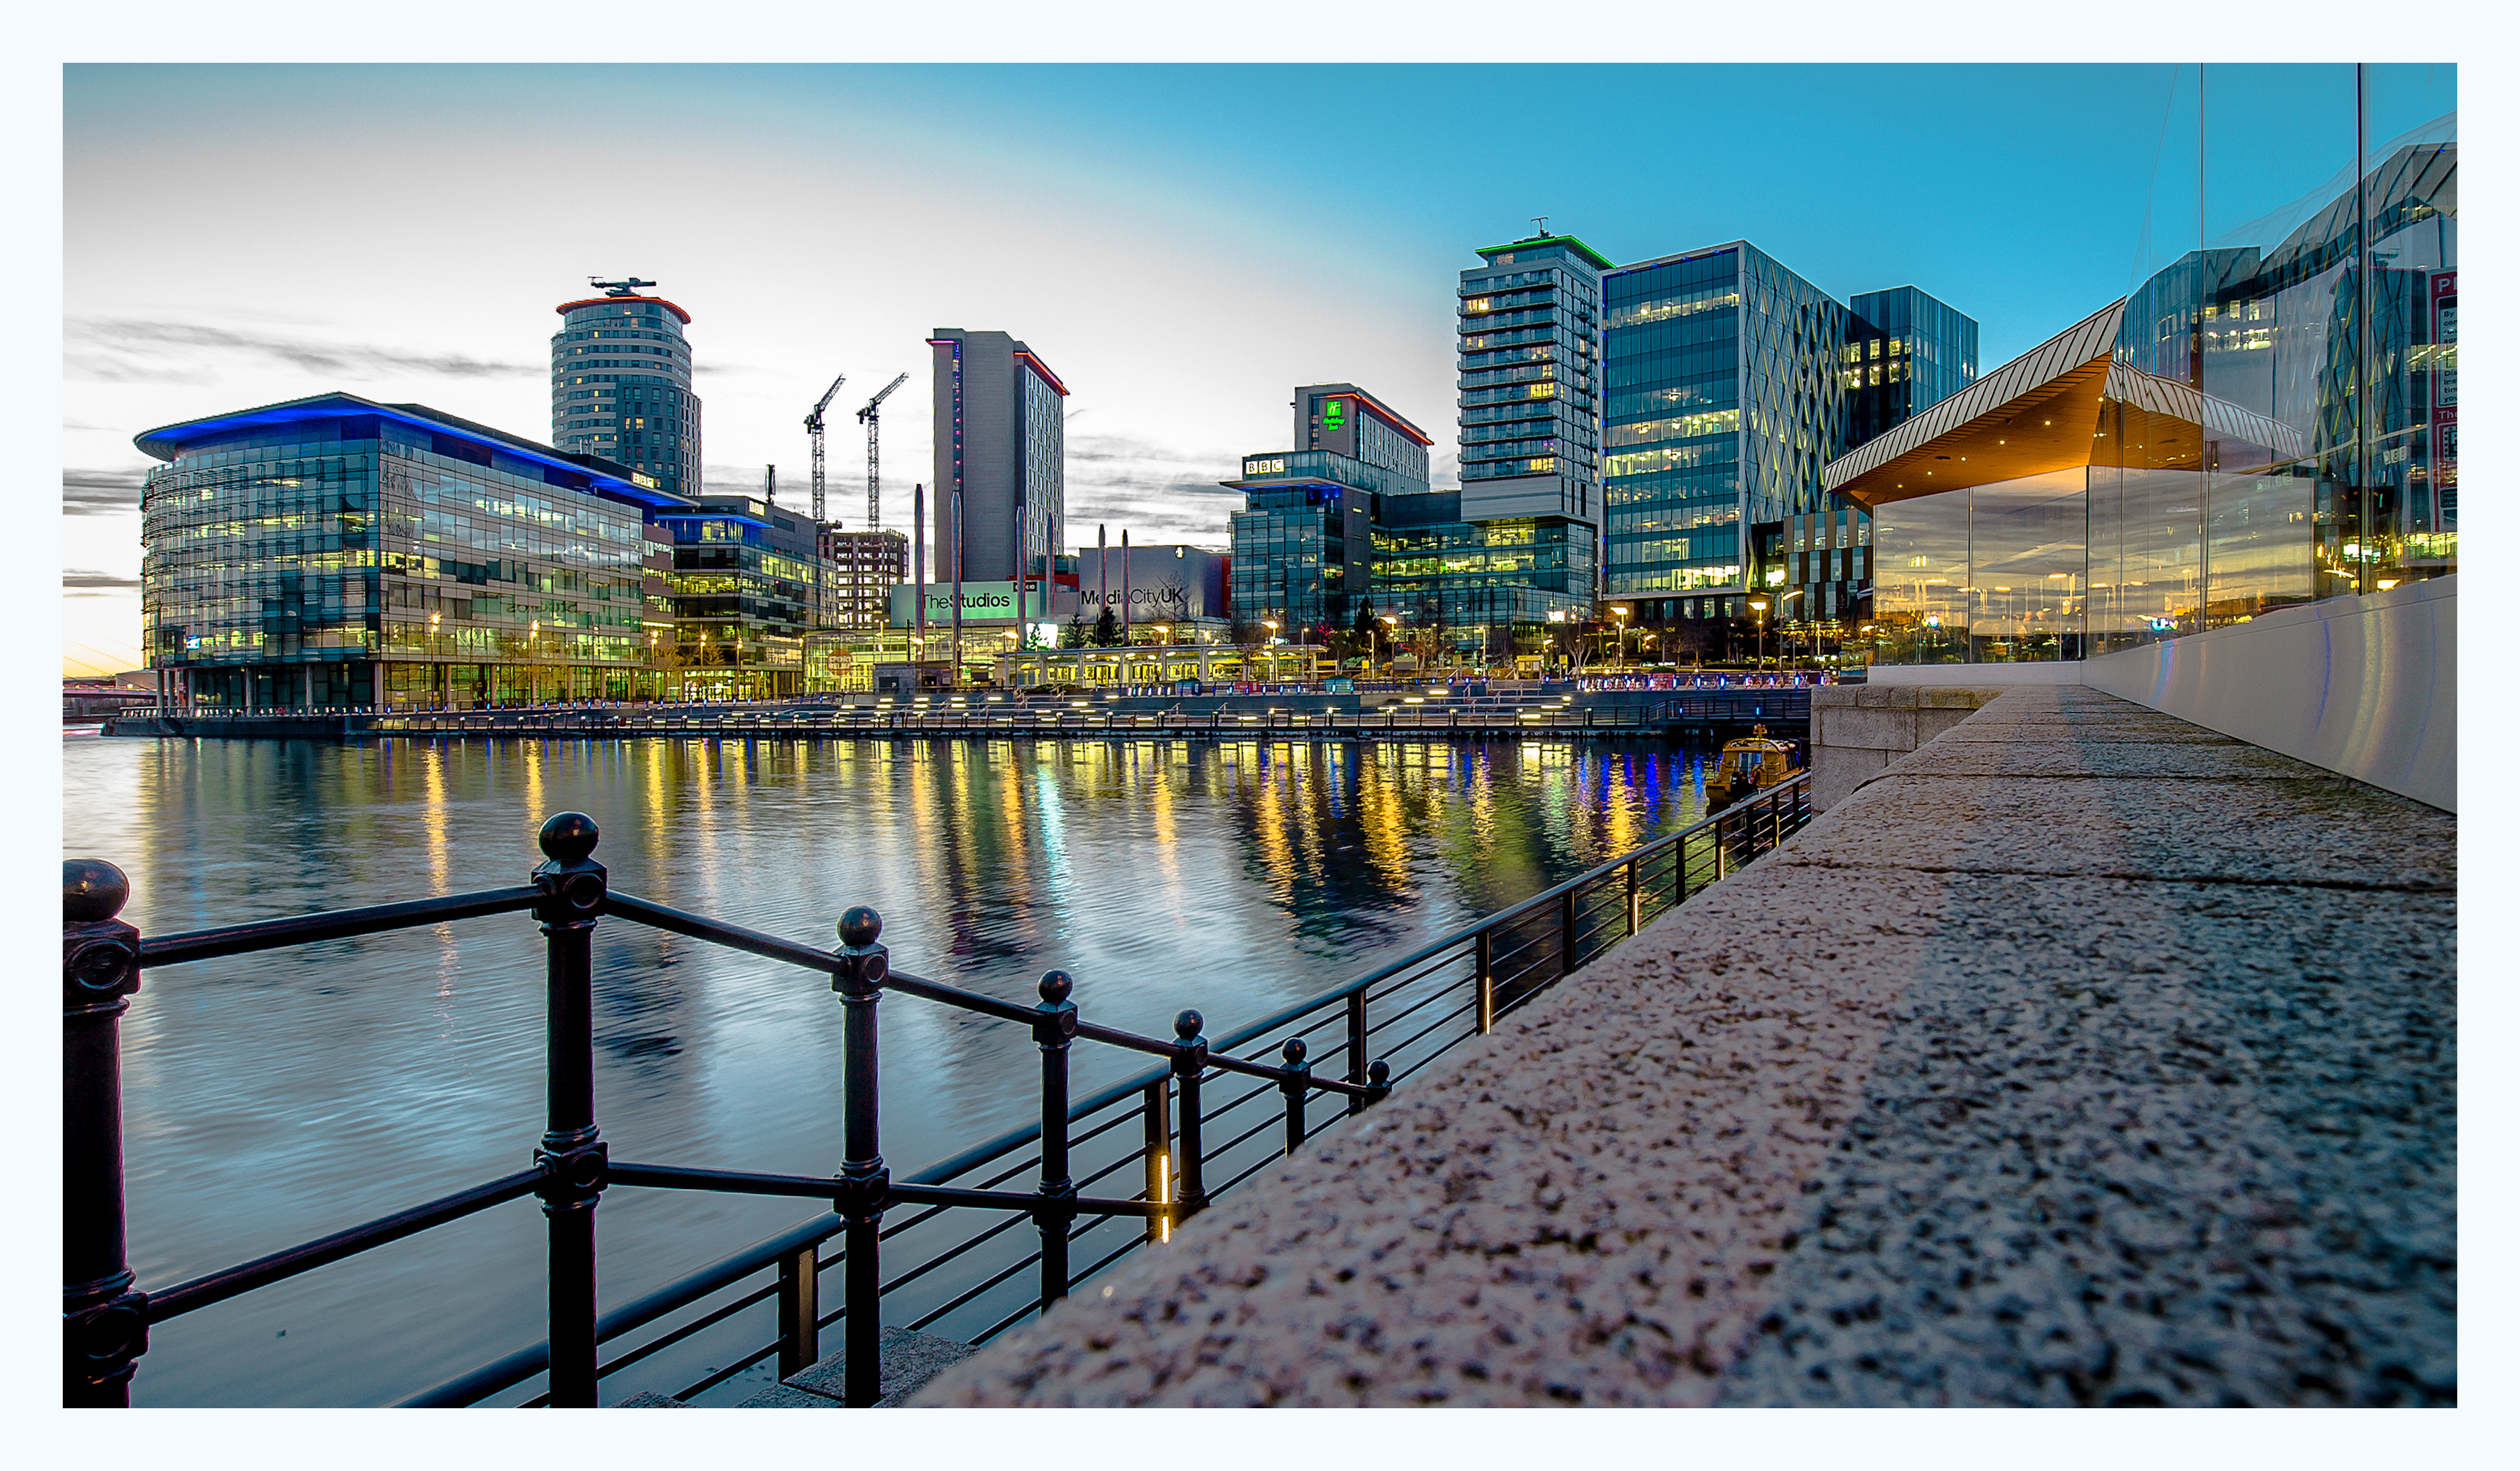 The Quays at dusk